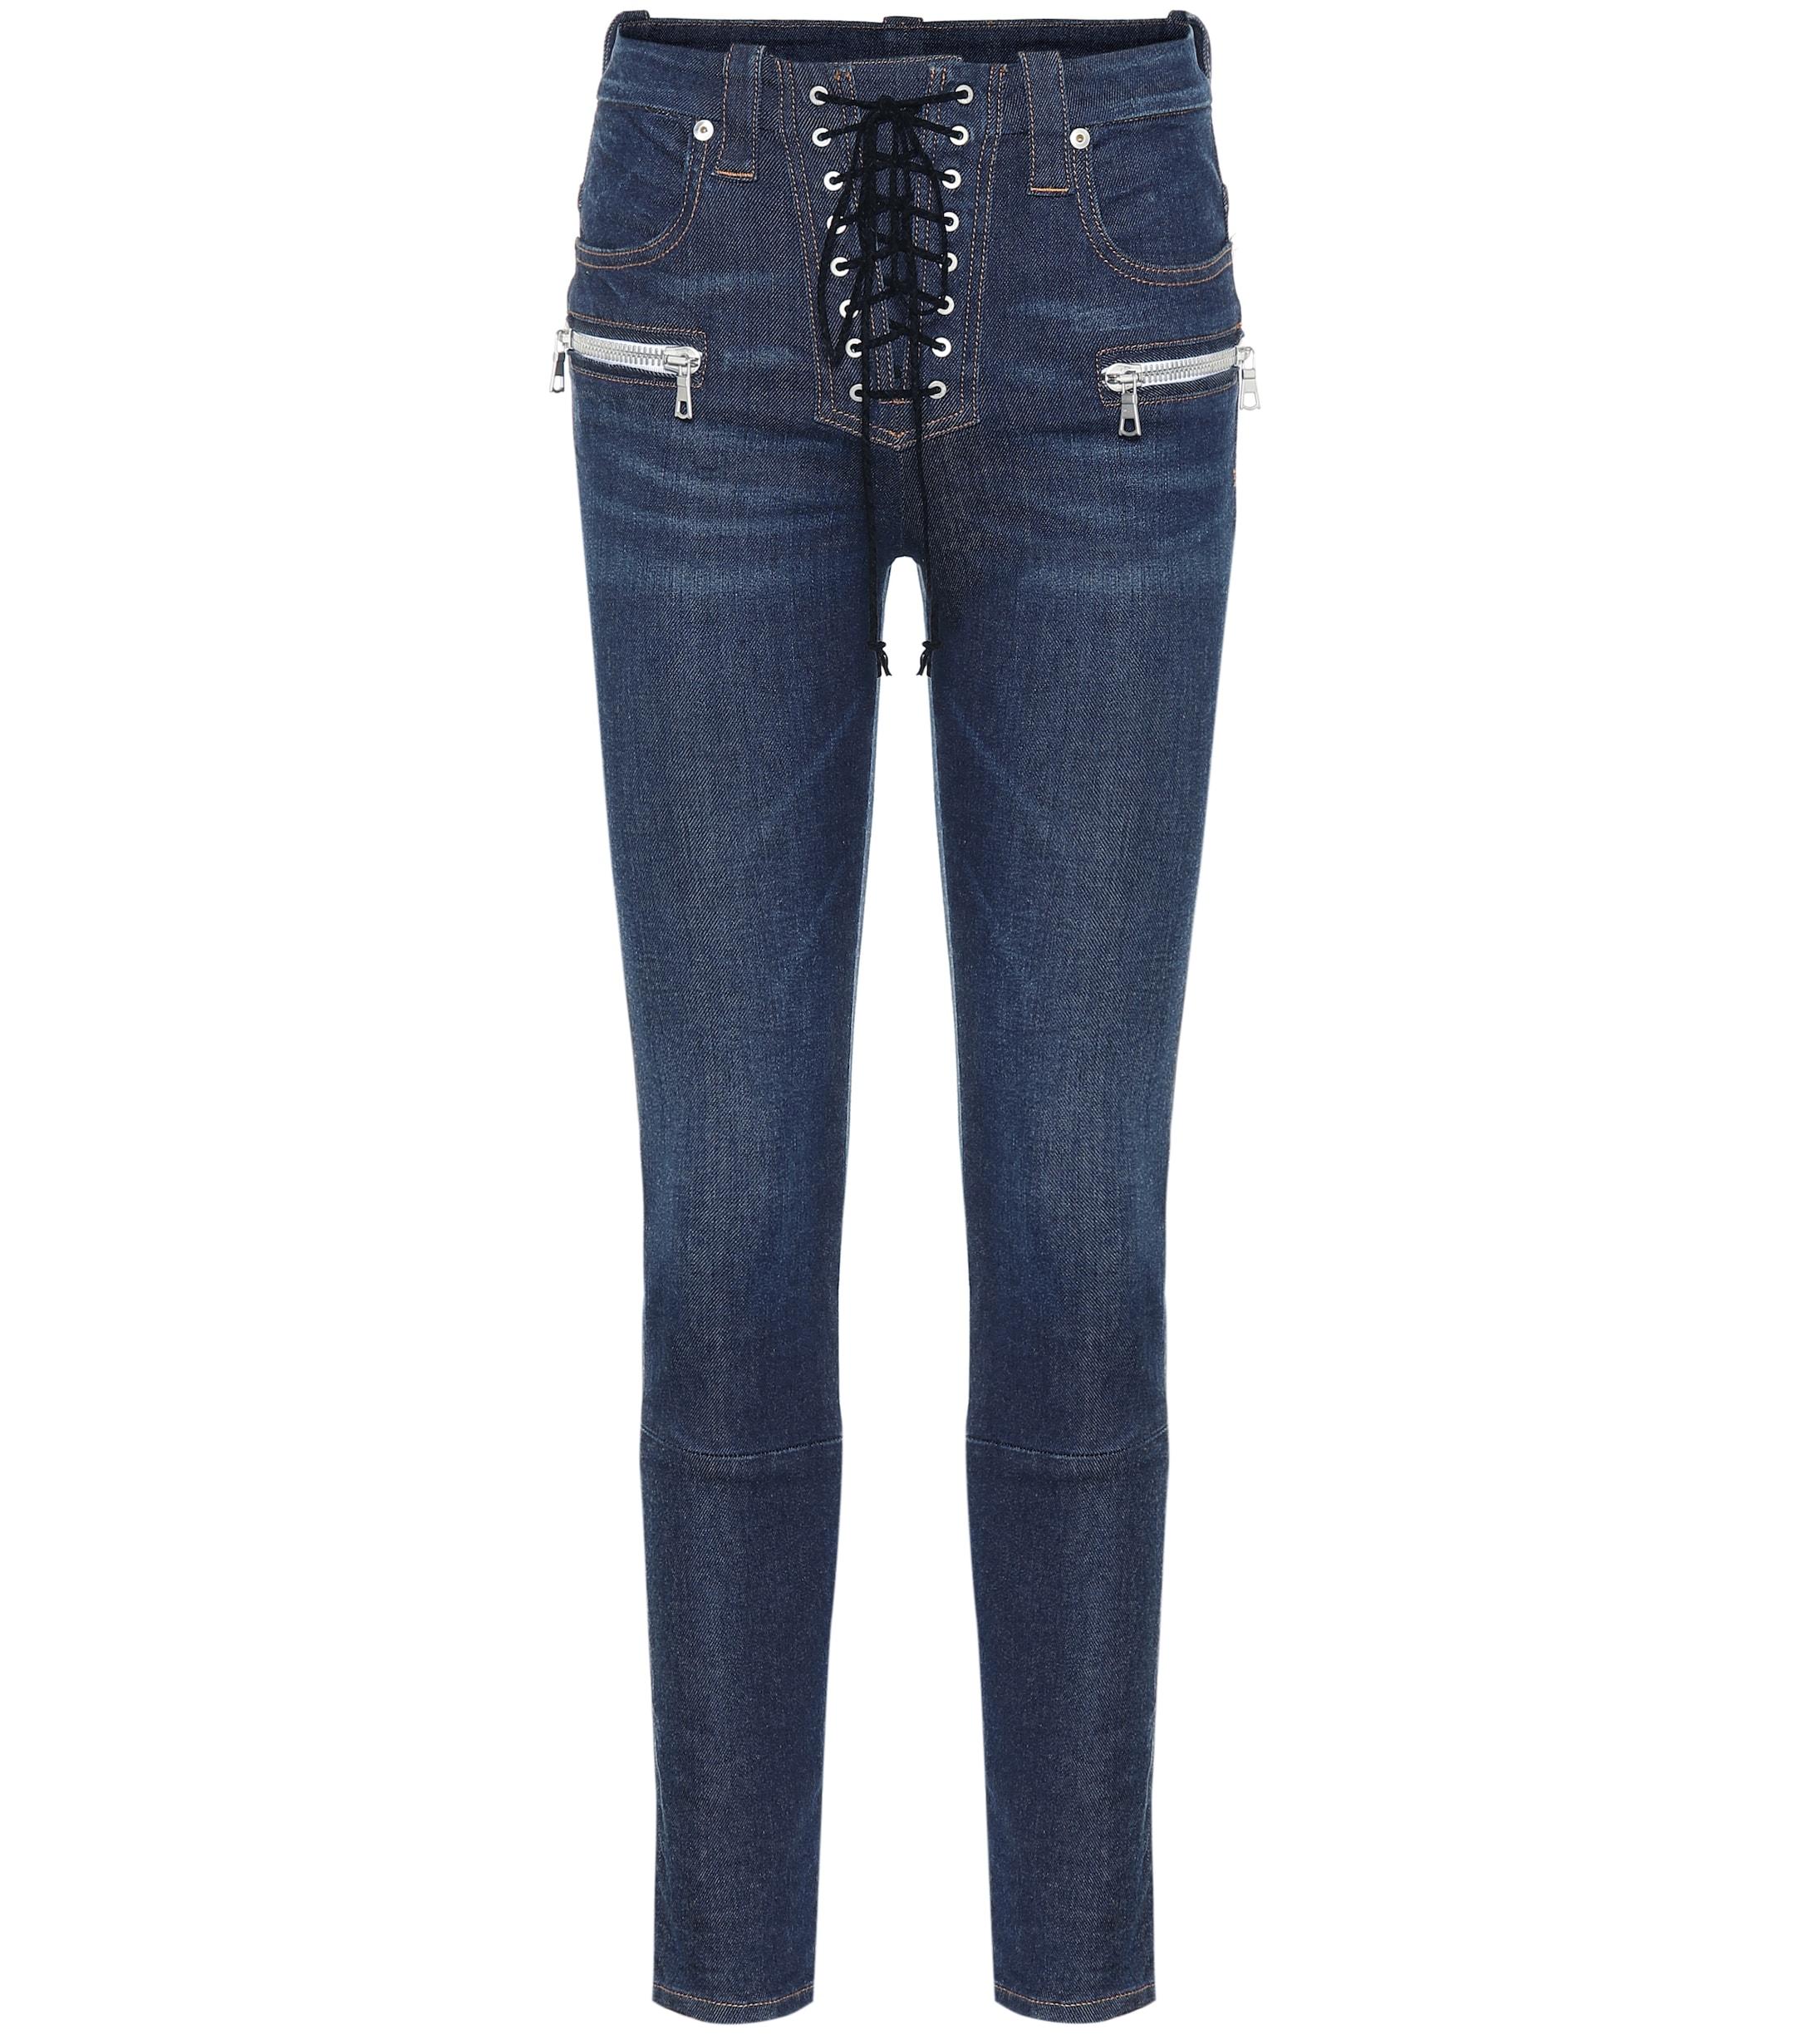 Unravel Project Denim Lace-up Skinny Jeans in Blue - Lyst